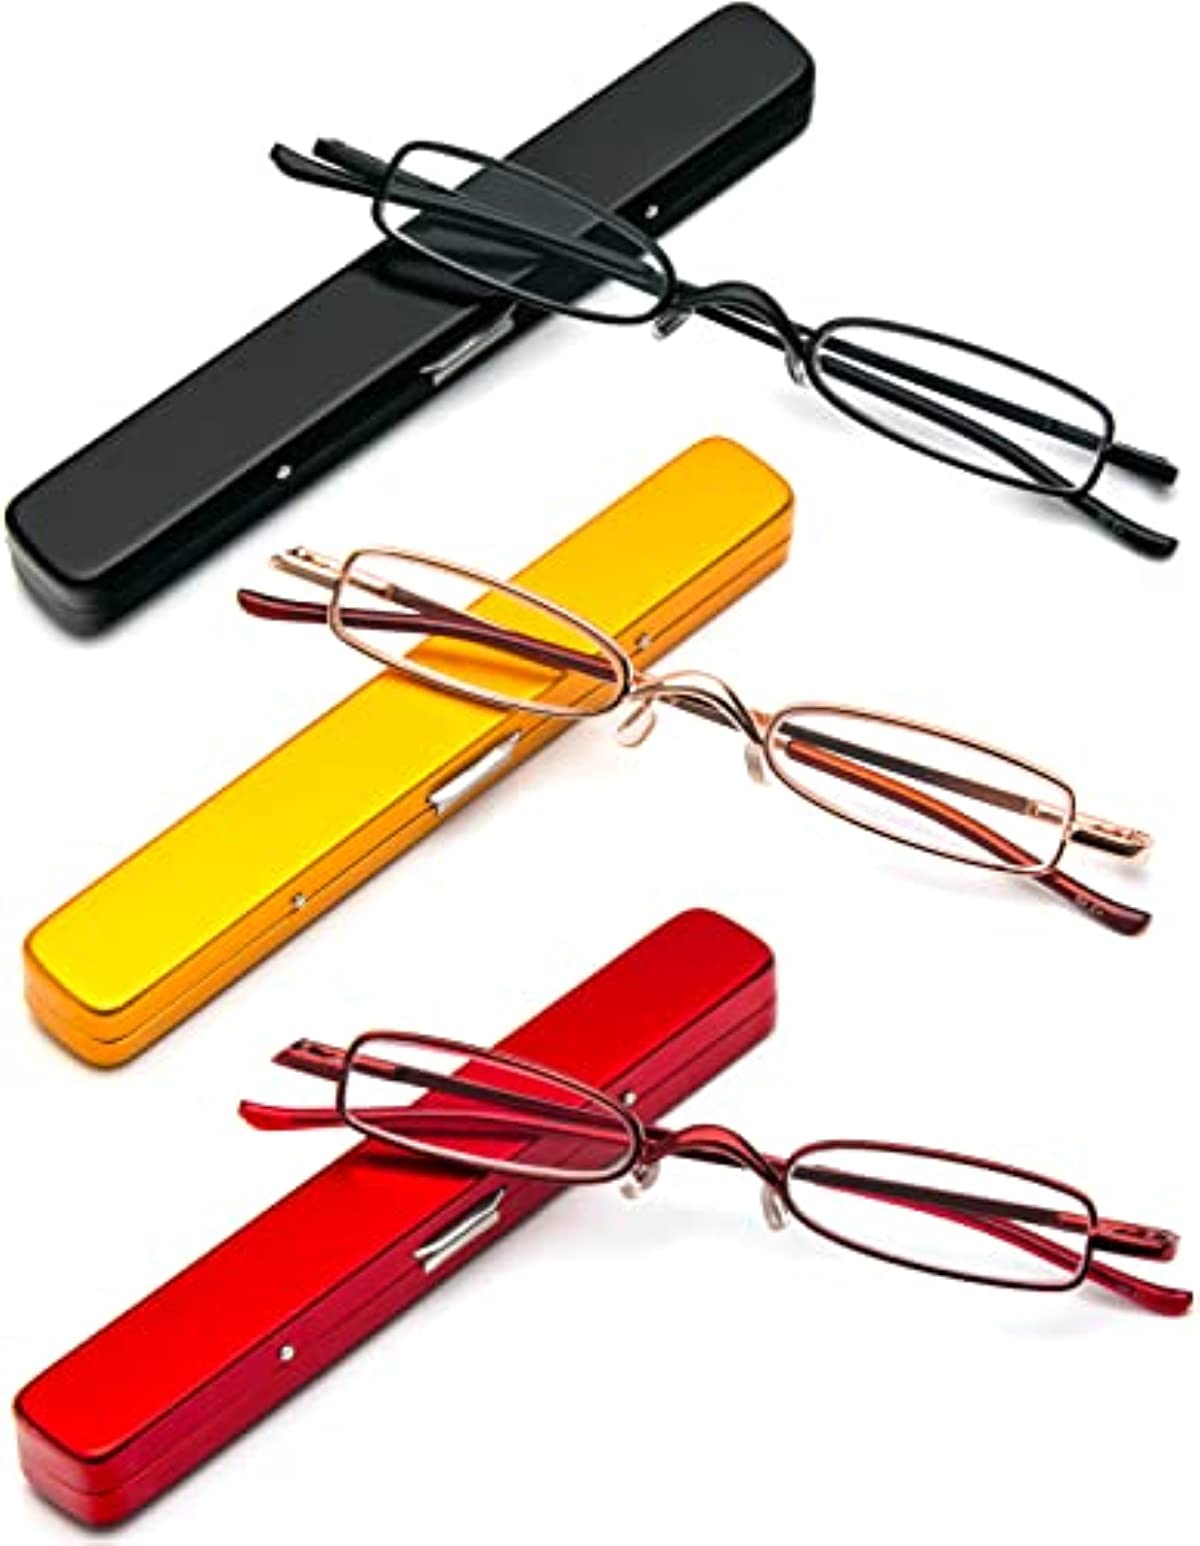 REAVEE 3 Pack Pocket Small Reading Glasses for Women Men Metal Ultra Slim Portable Readers with Pen Clip Case Spring Hinge, Black Red Gold +1.5